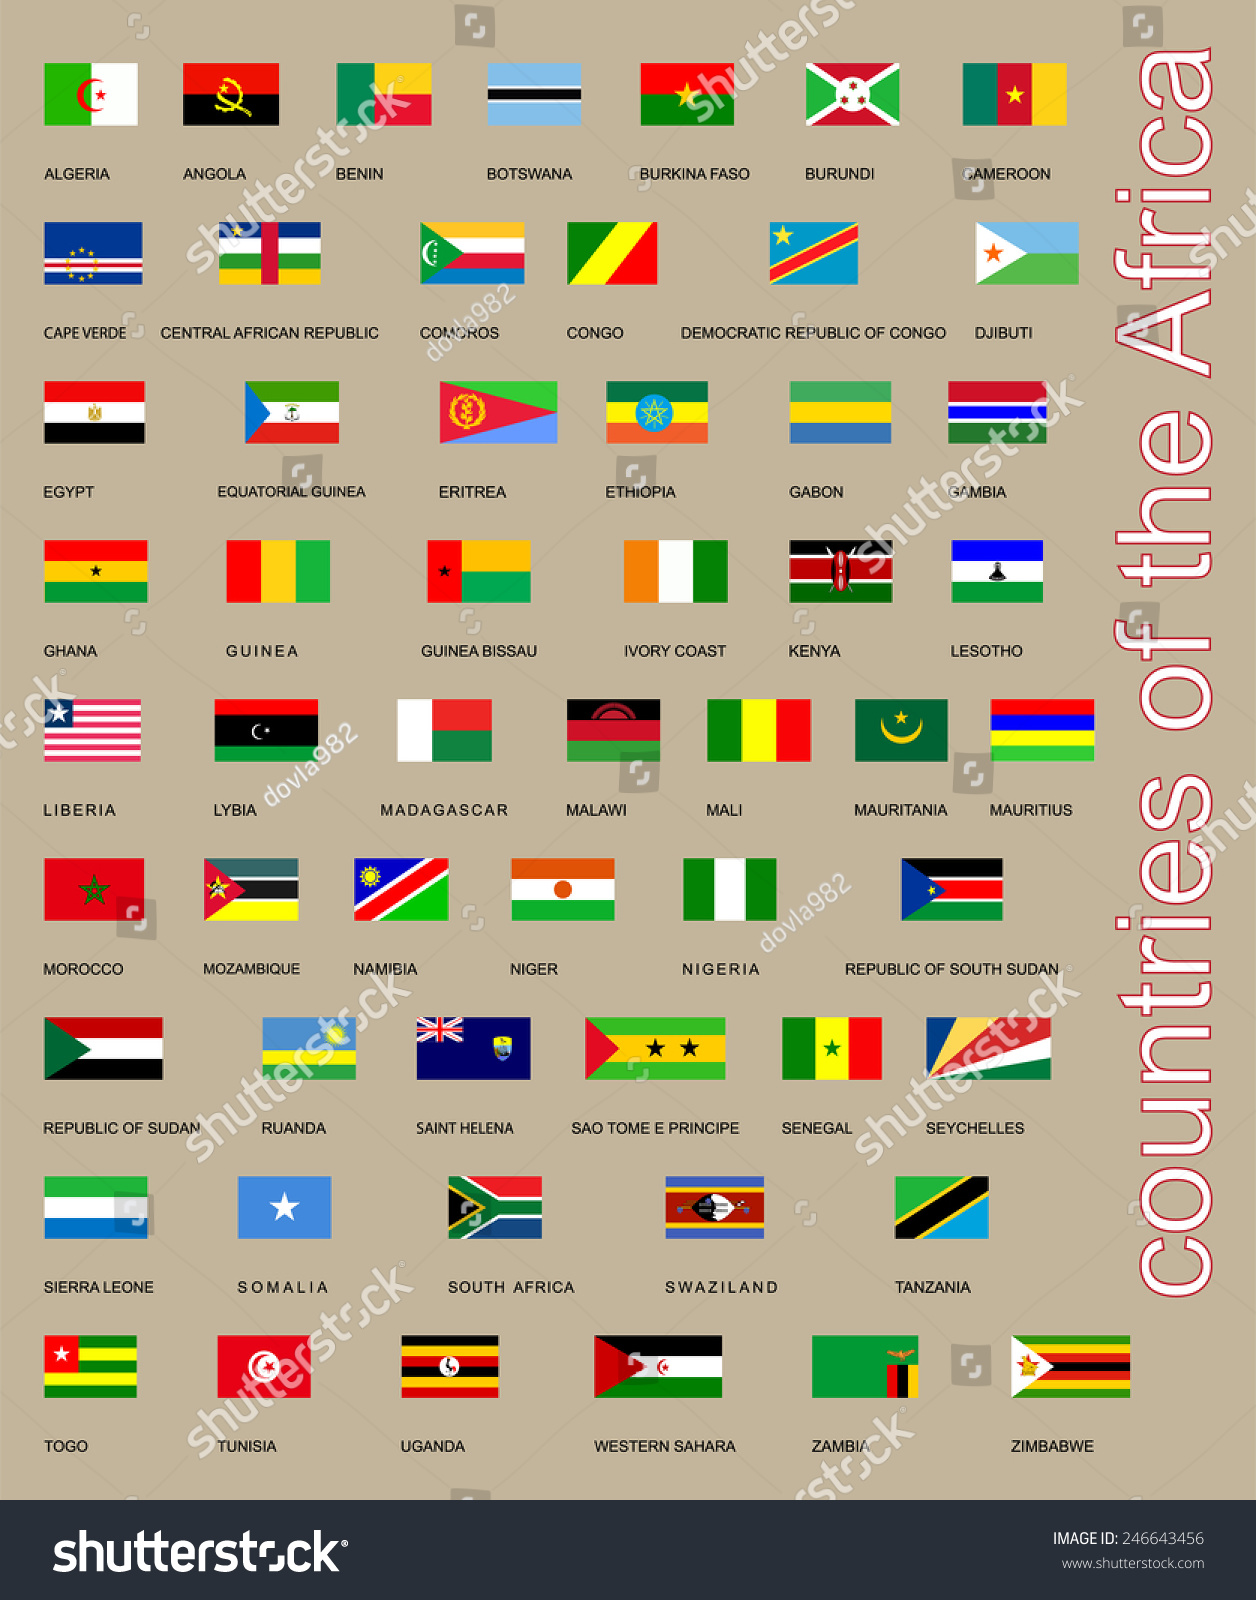 All Flags Africa Countries Original Flags Stock Vector 246643456 Shutterstock 8490